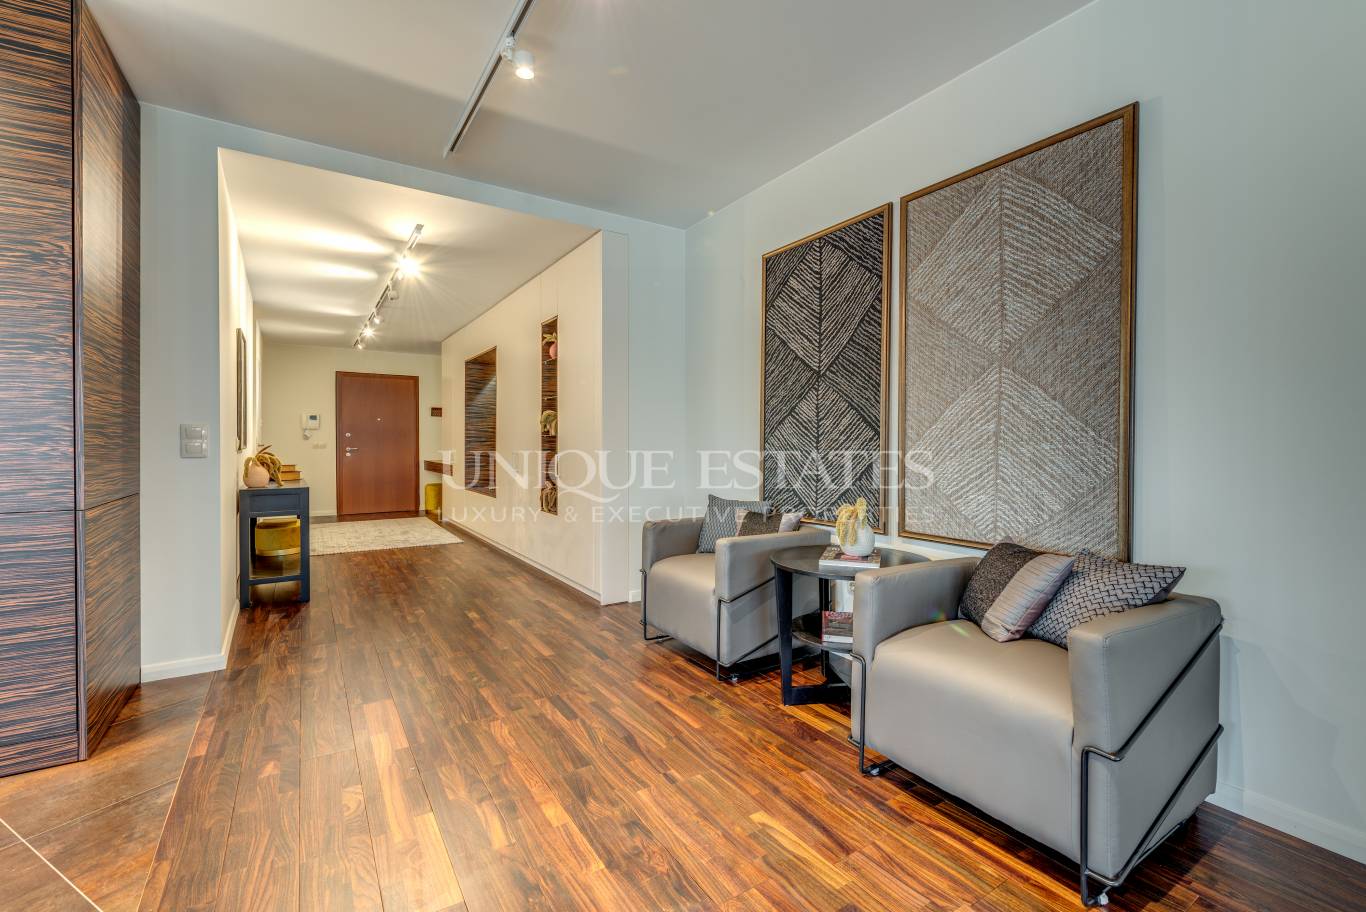 Apartment for rent in Sofia, Iztok with listing ID: N14860 - image 2